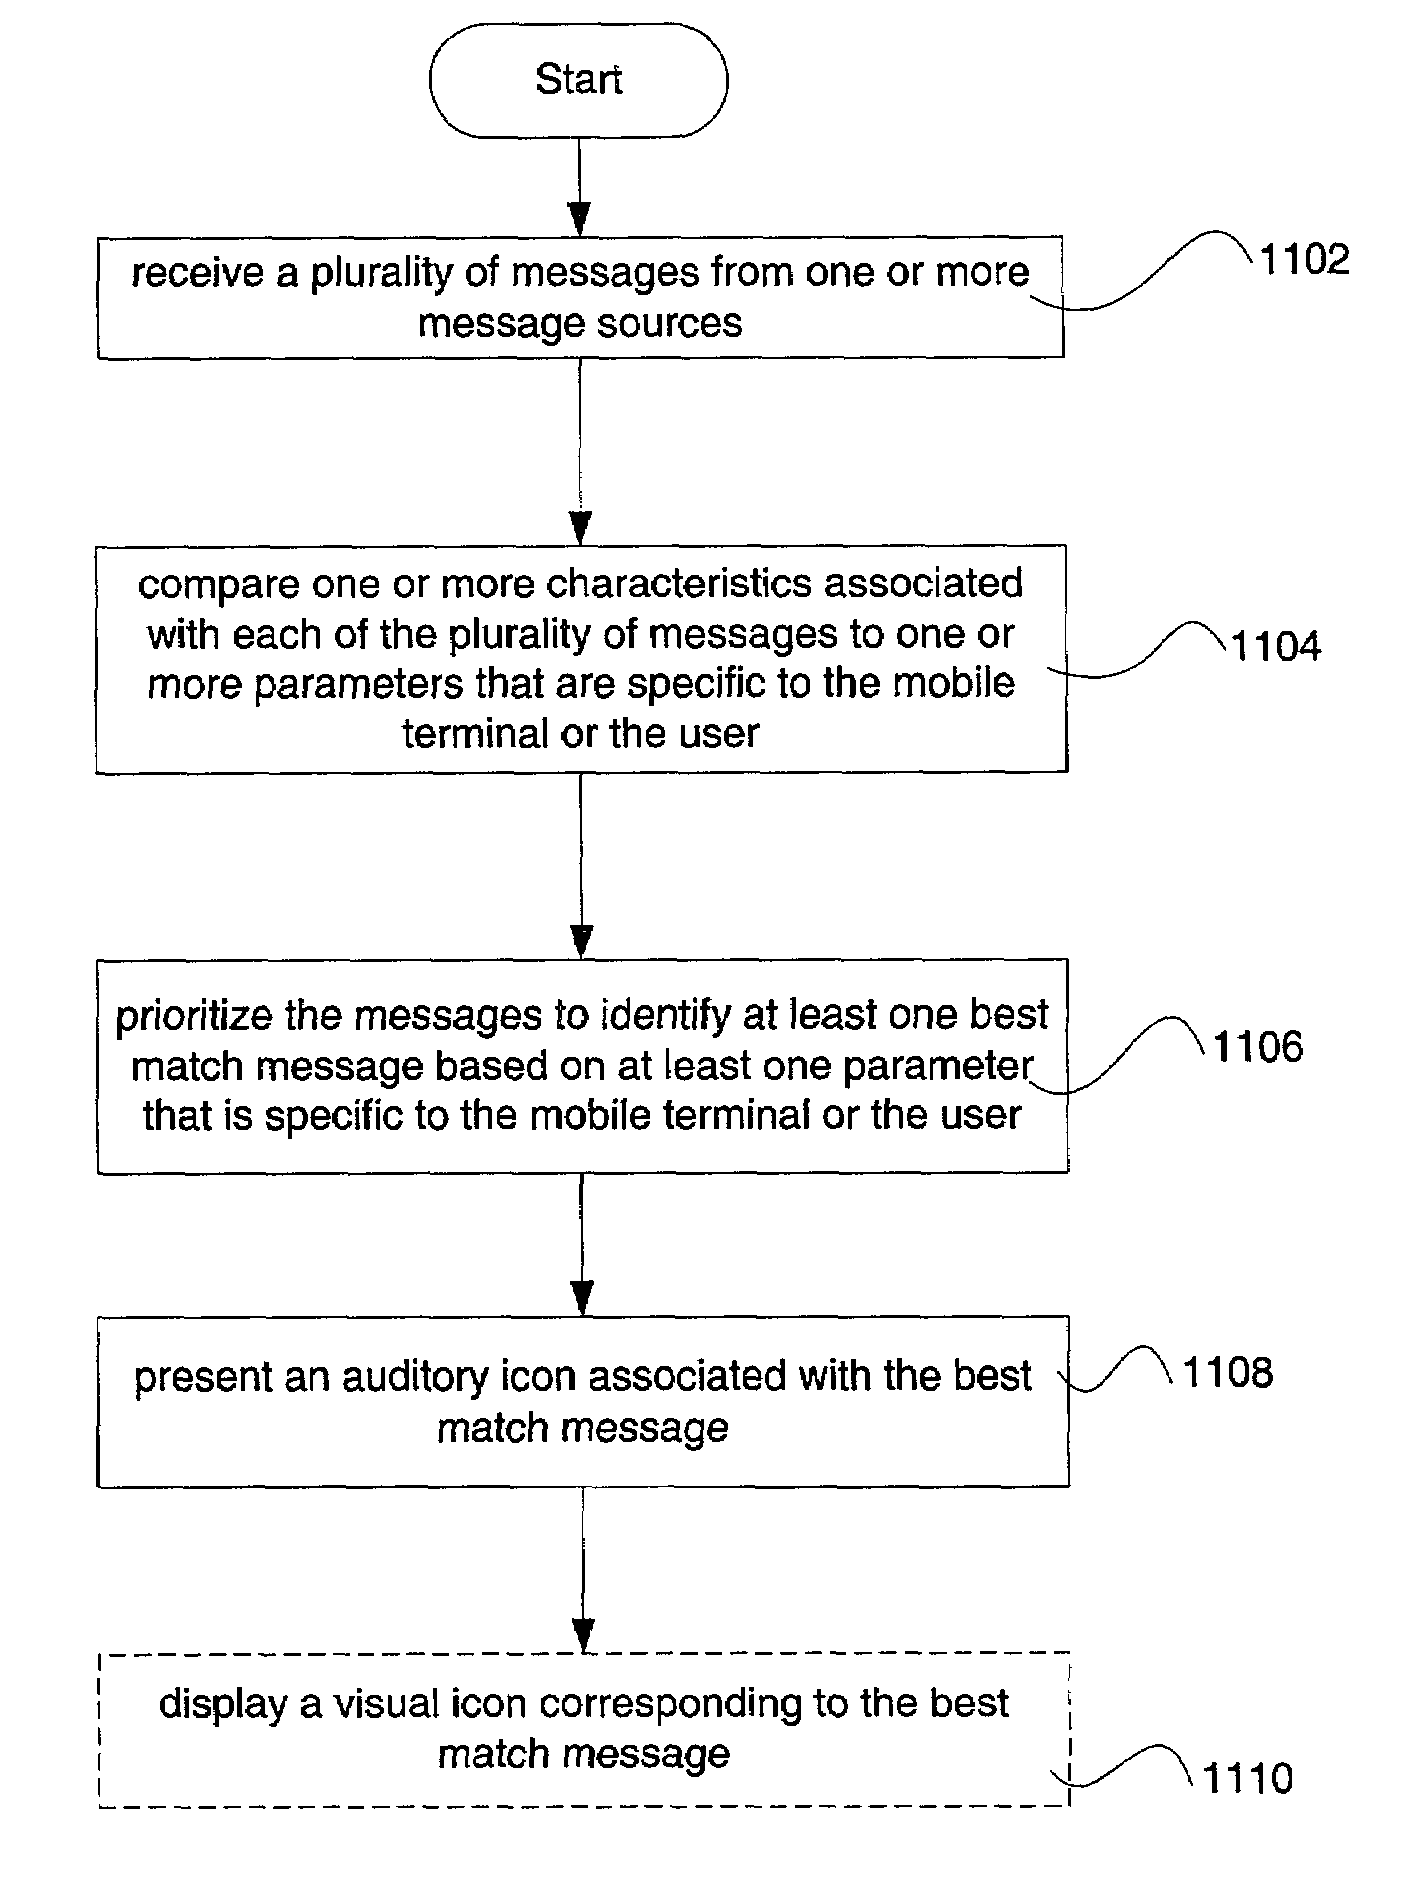 Method and apparatus for presenting auditory icons in a mobile terminal